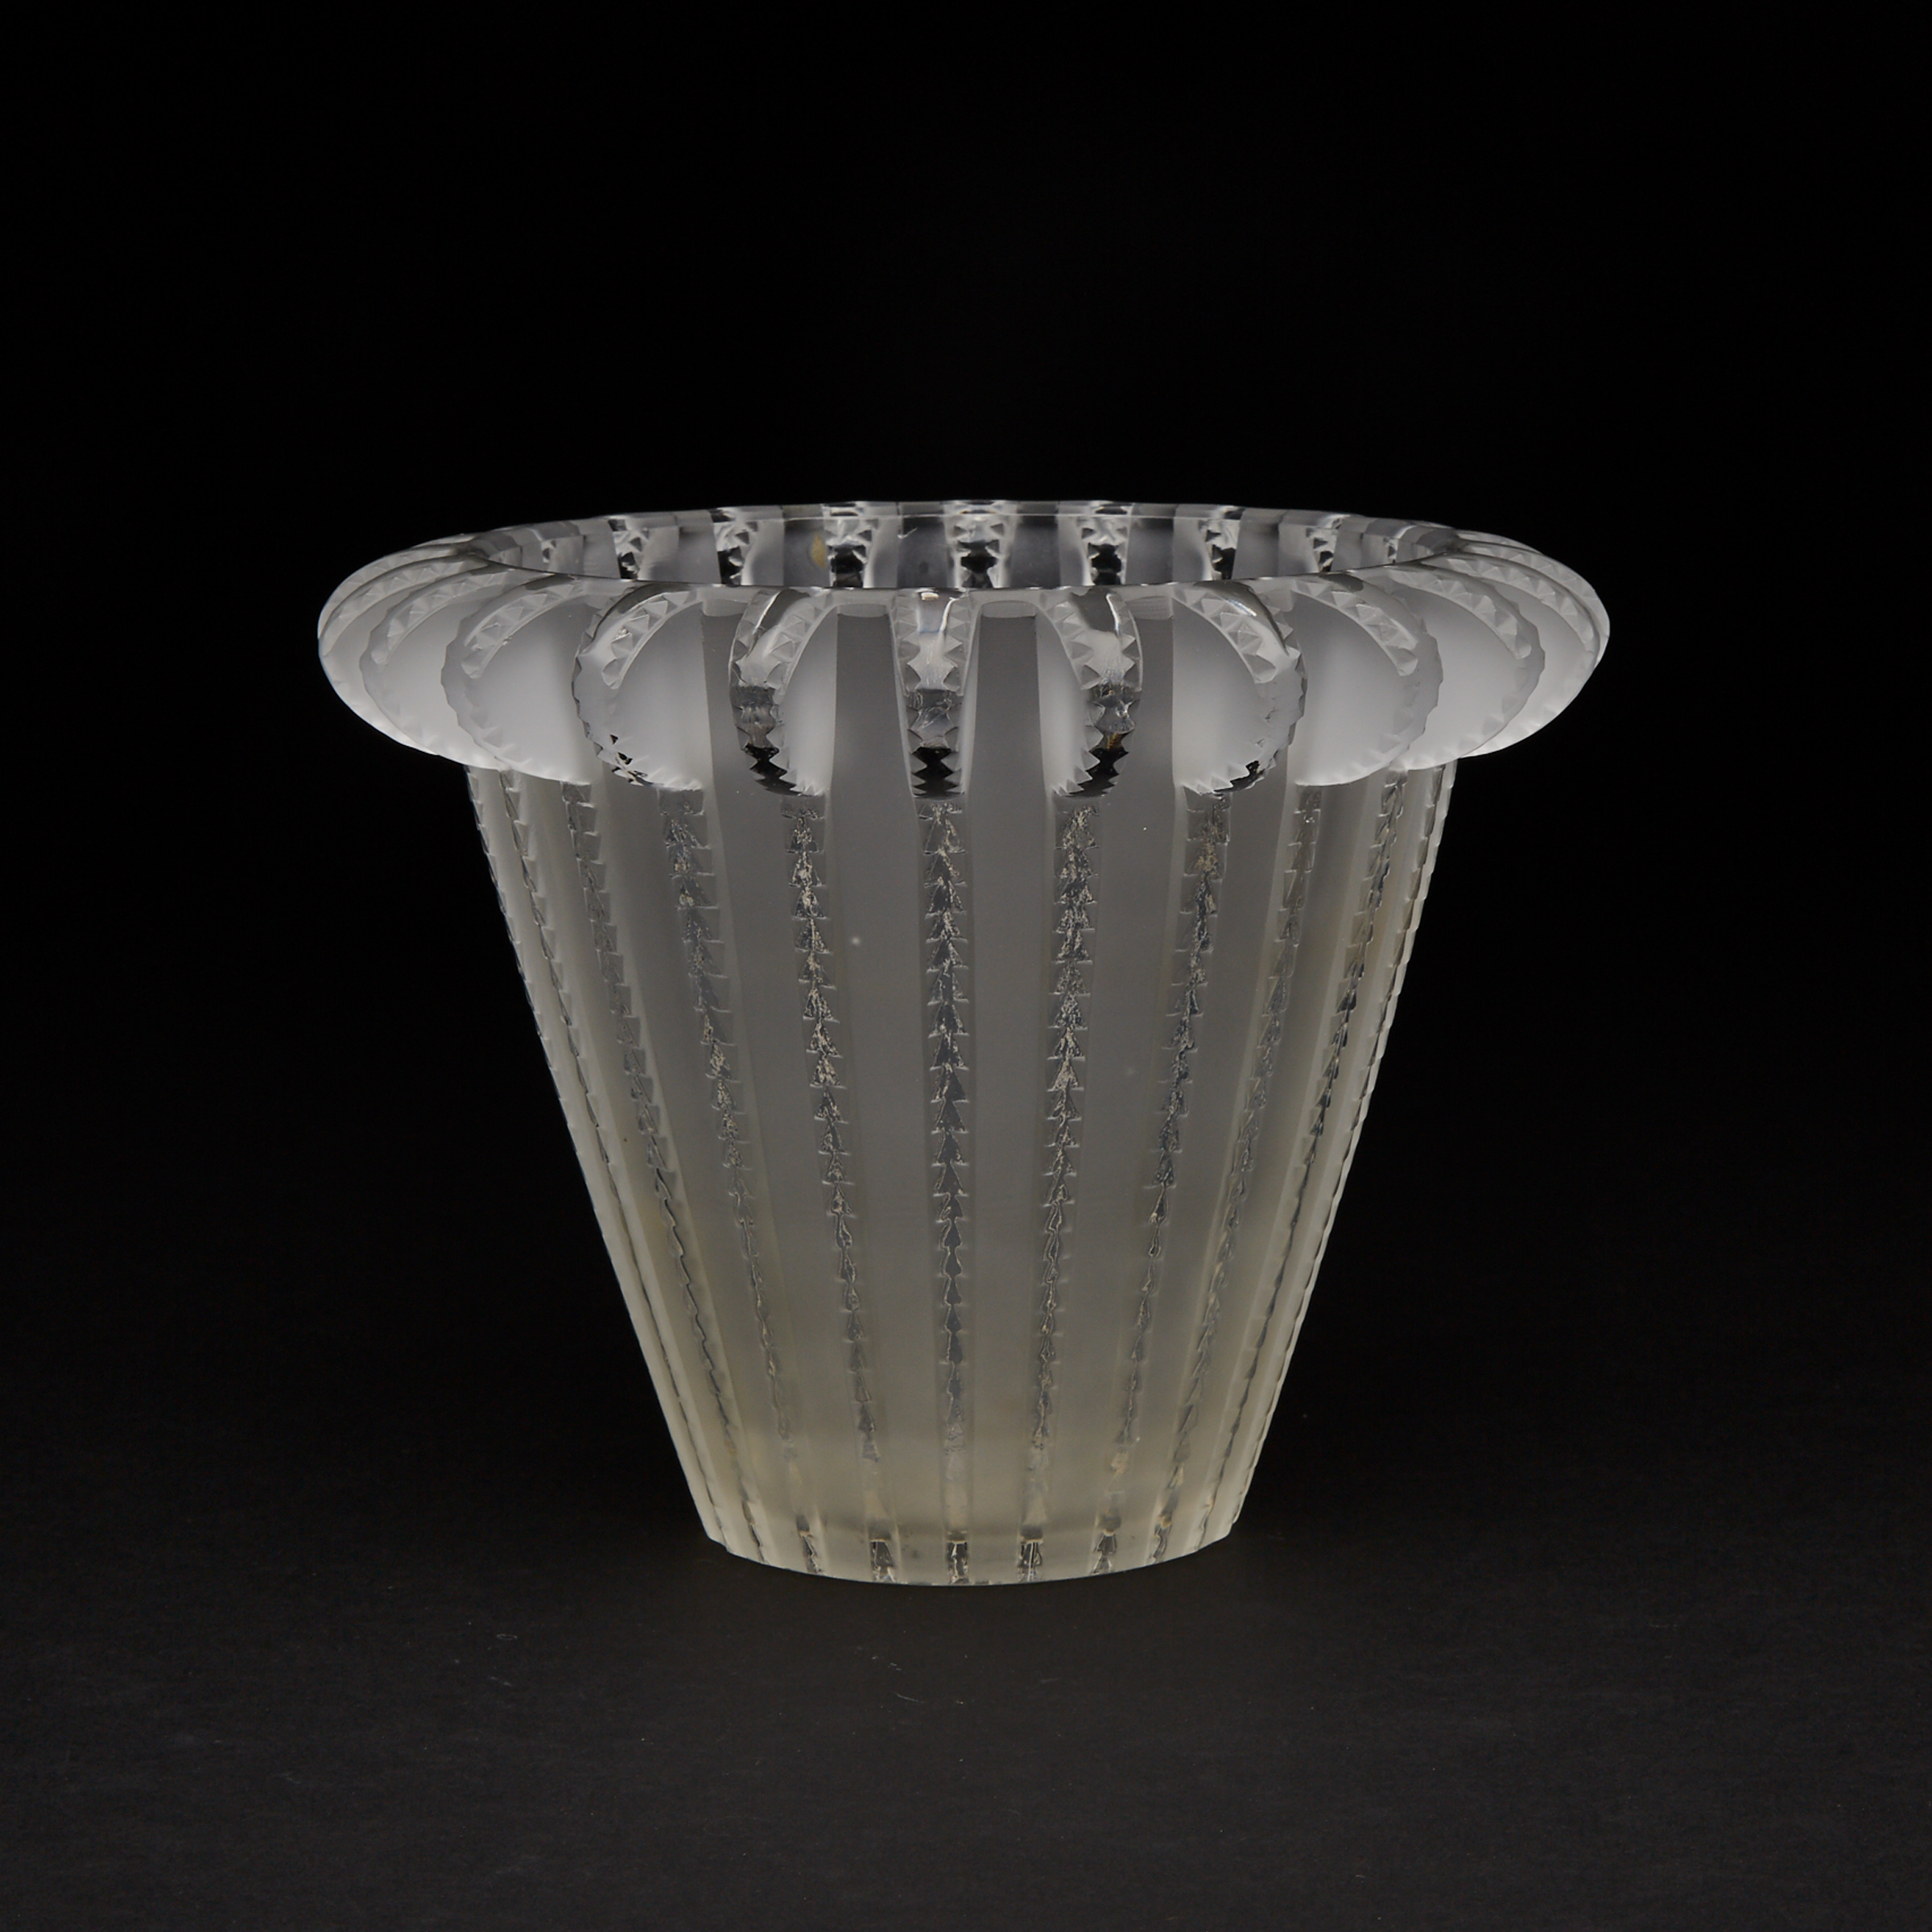 ‘Royat’, Lalique Moulded and Frosted Glass Vase, post-1945